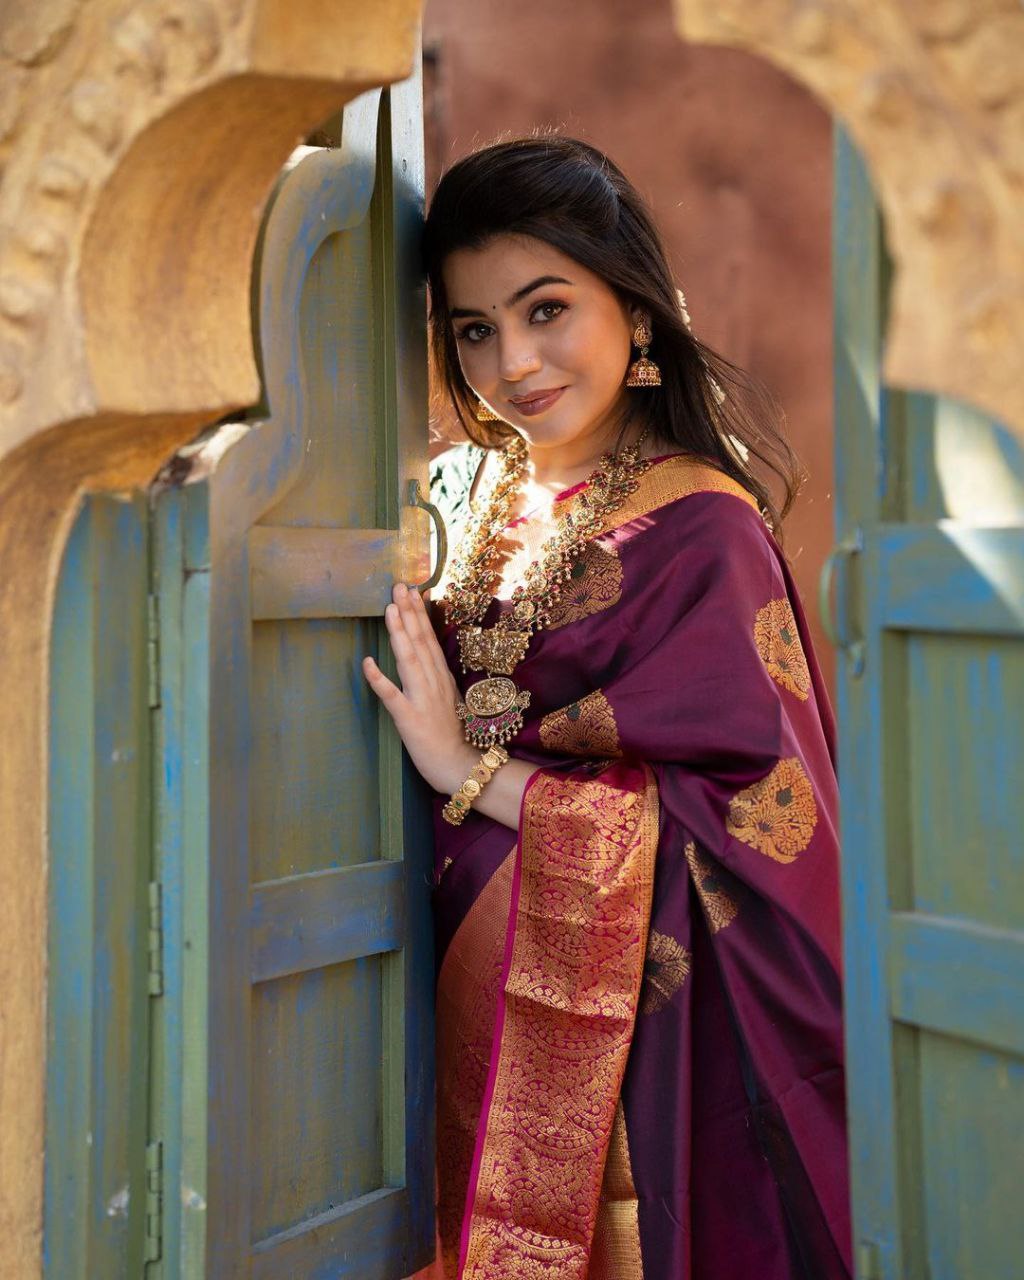 Adorable Purple Color With Pink Border Saree